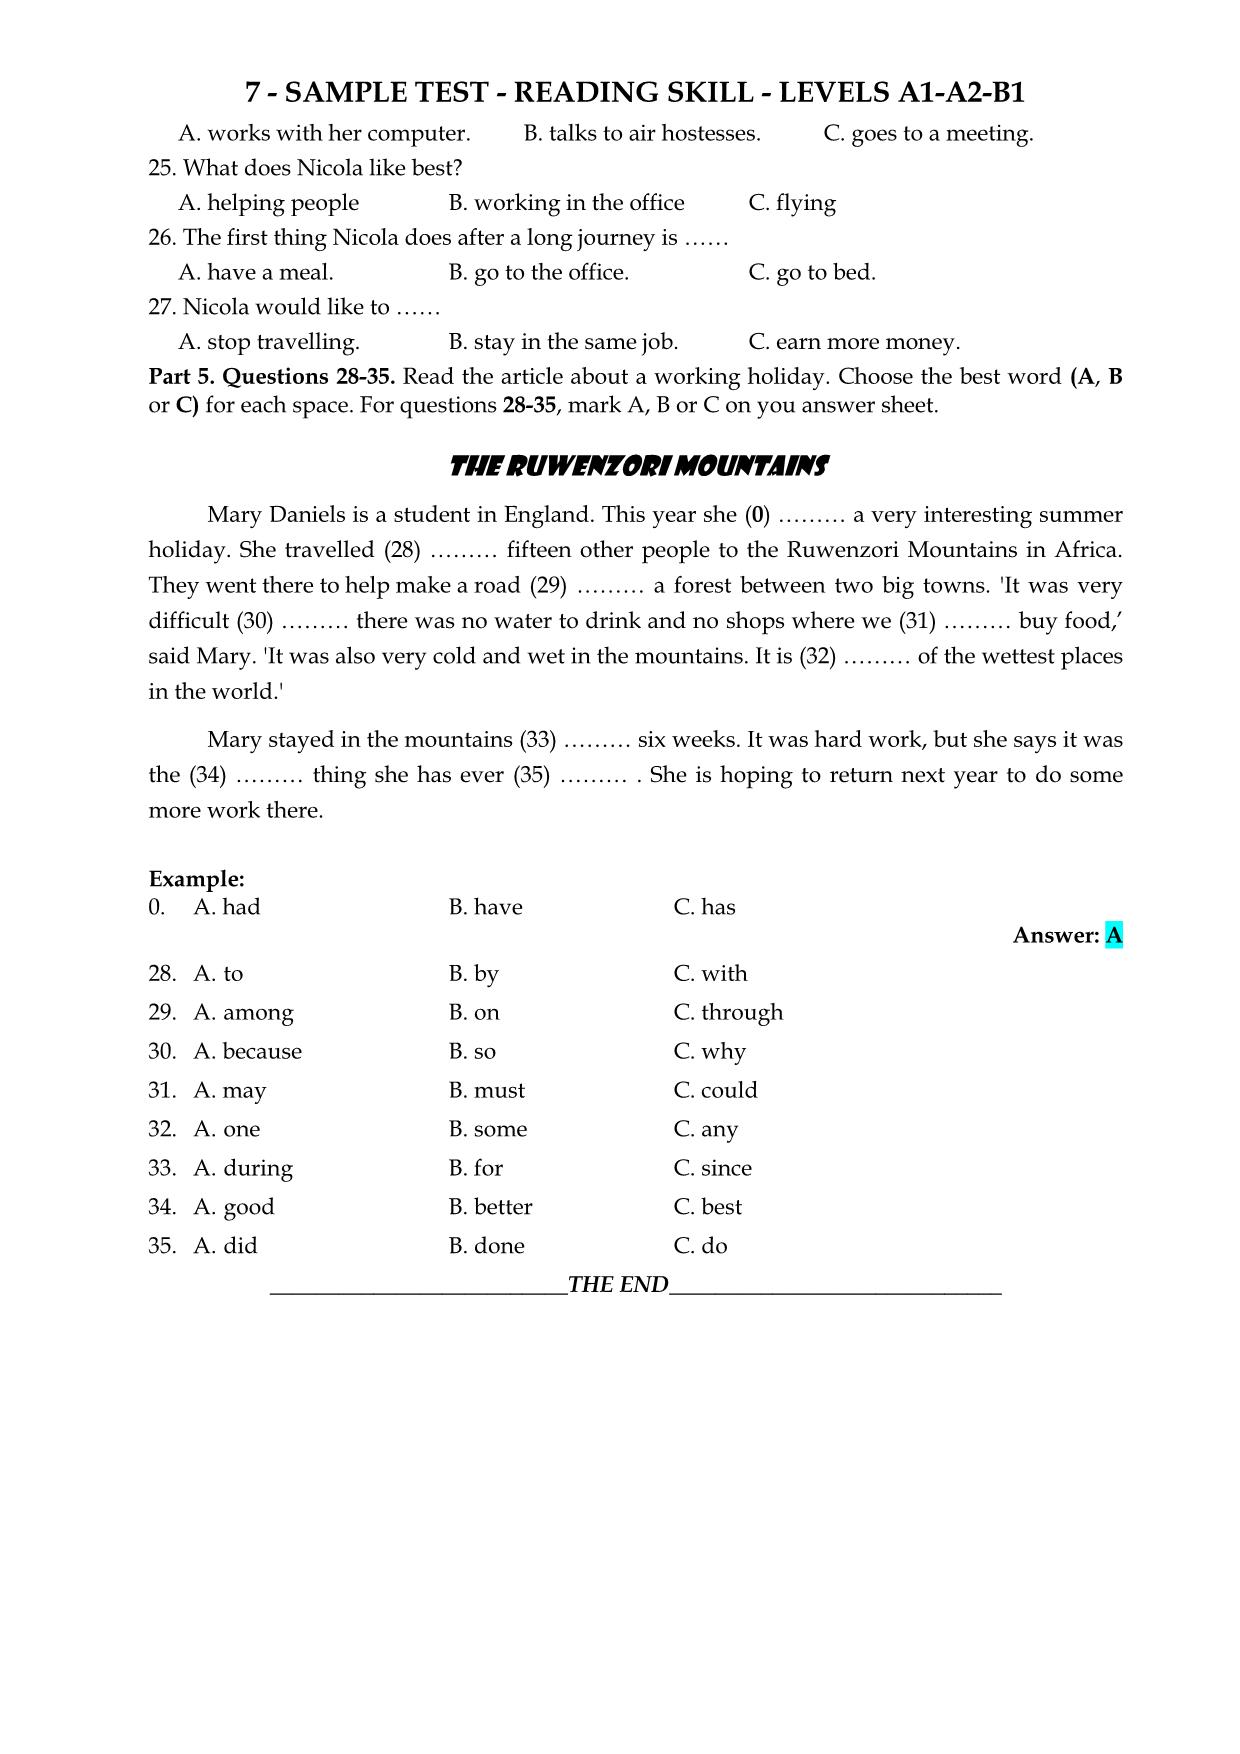 Tiếng Anh - Sample test - Reading skill - Levels  A1 - A2 - B1 trang 10